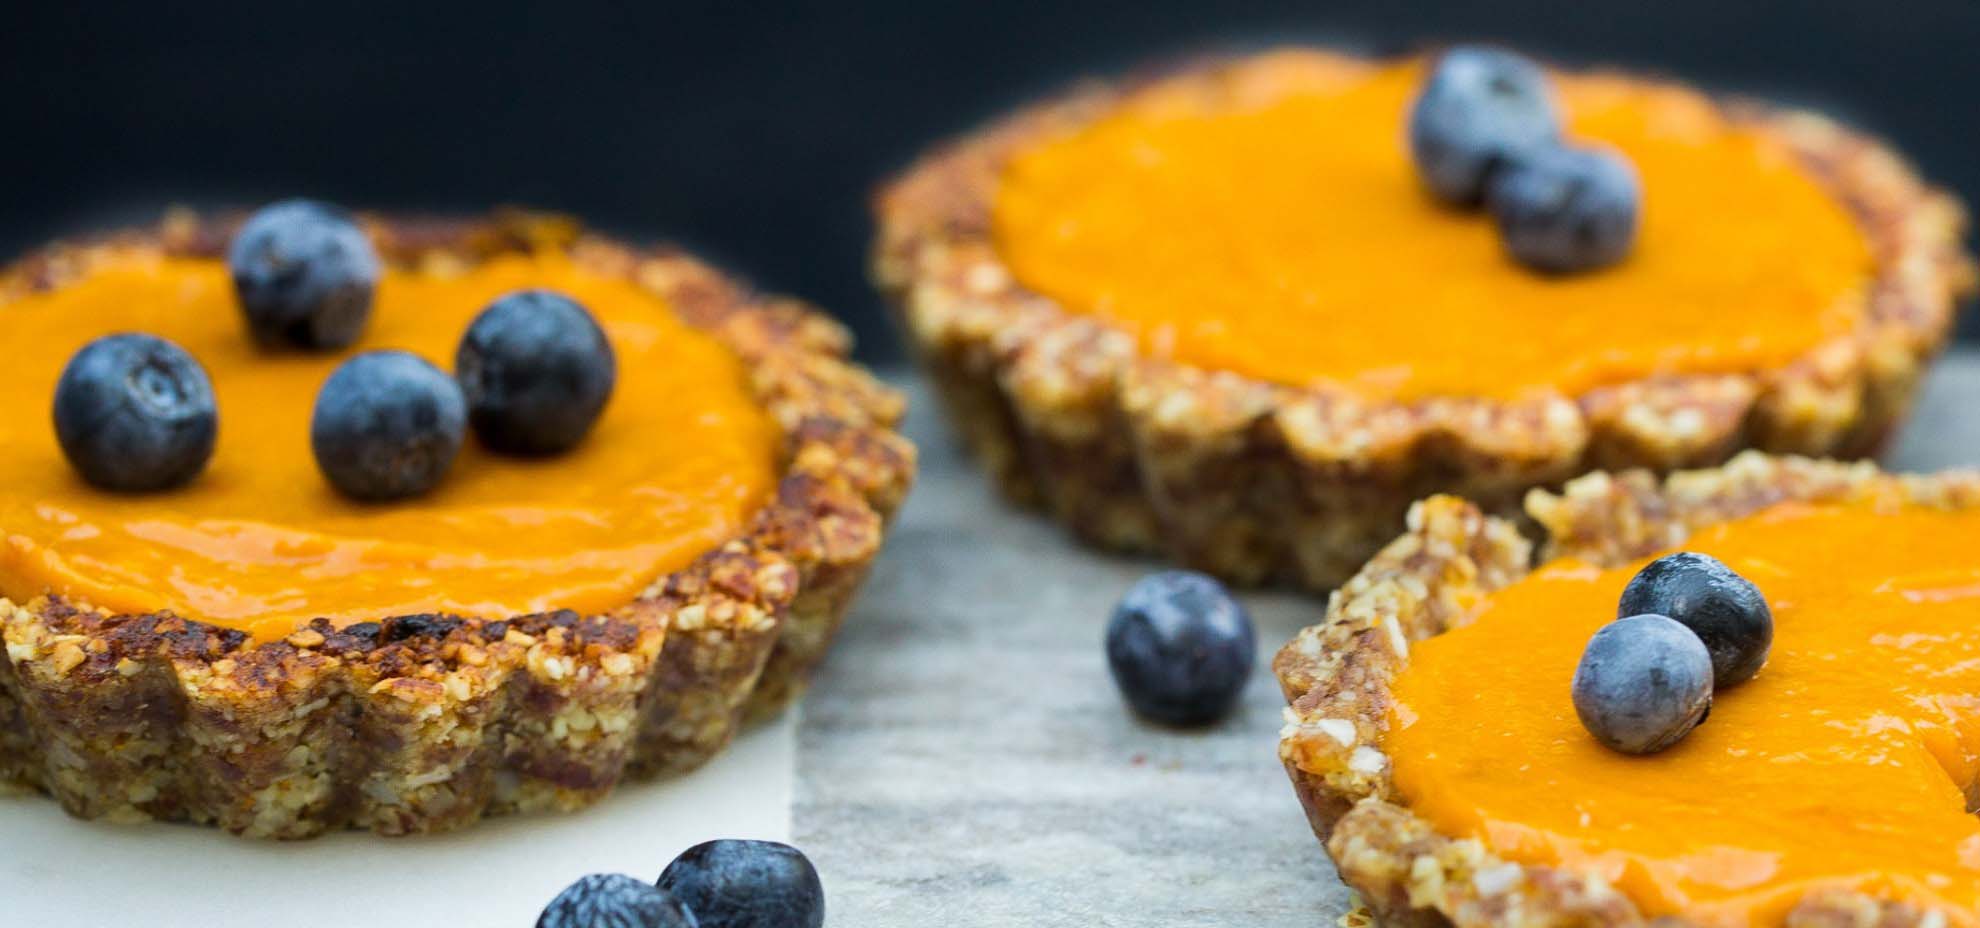 Mango and ginger tarts topped with blueberries.